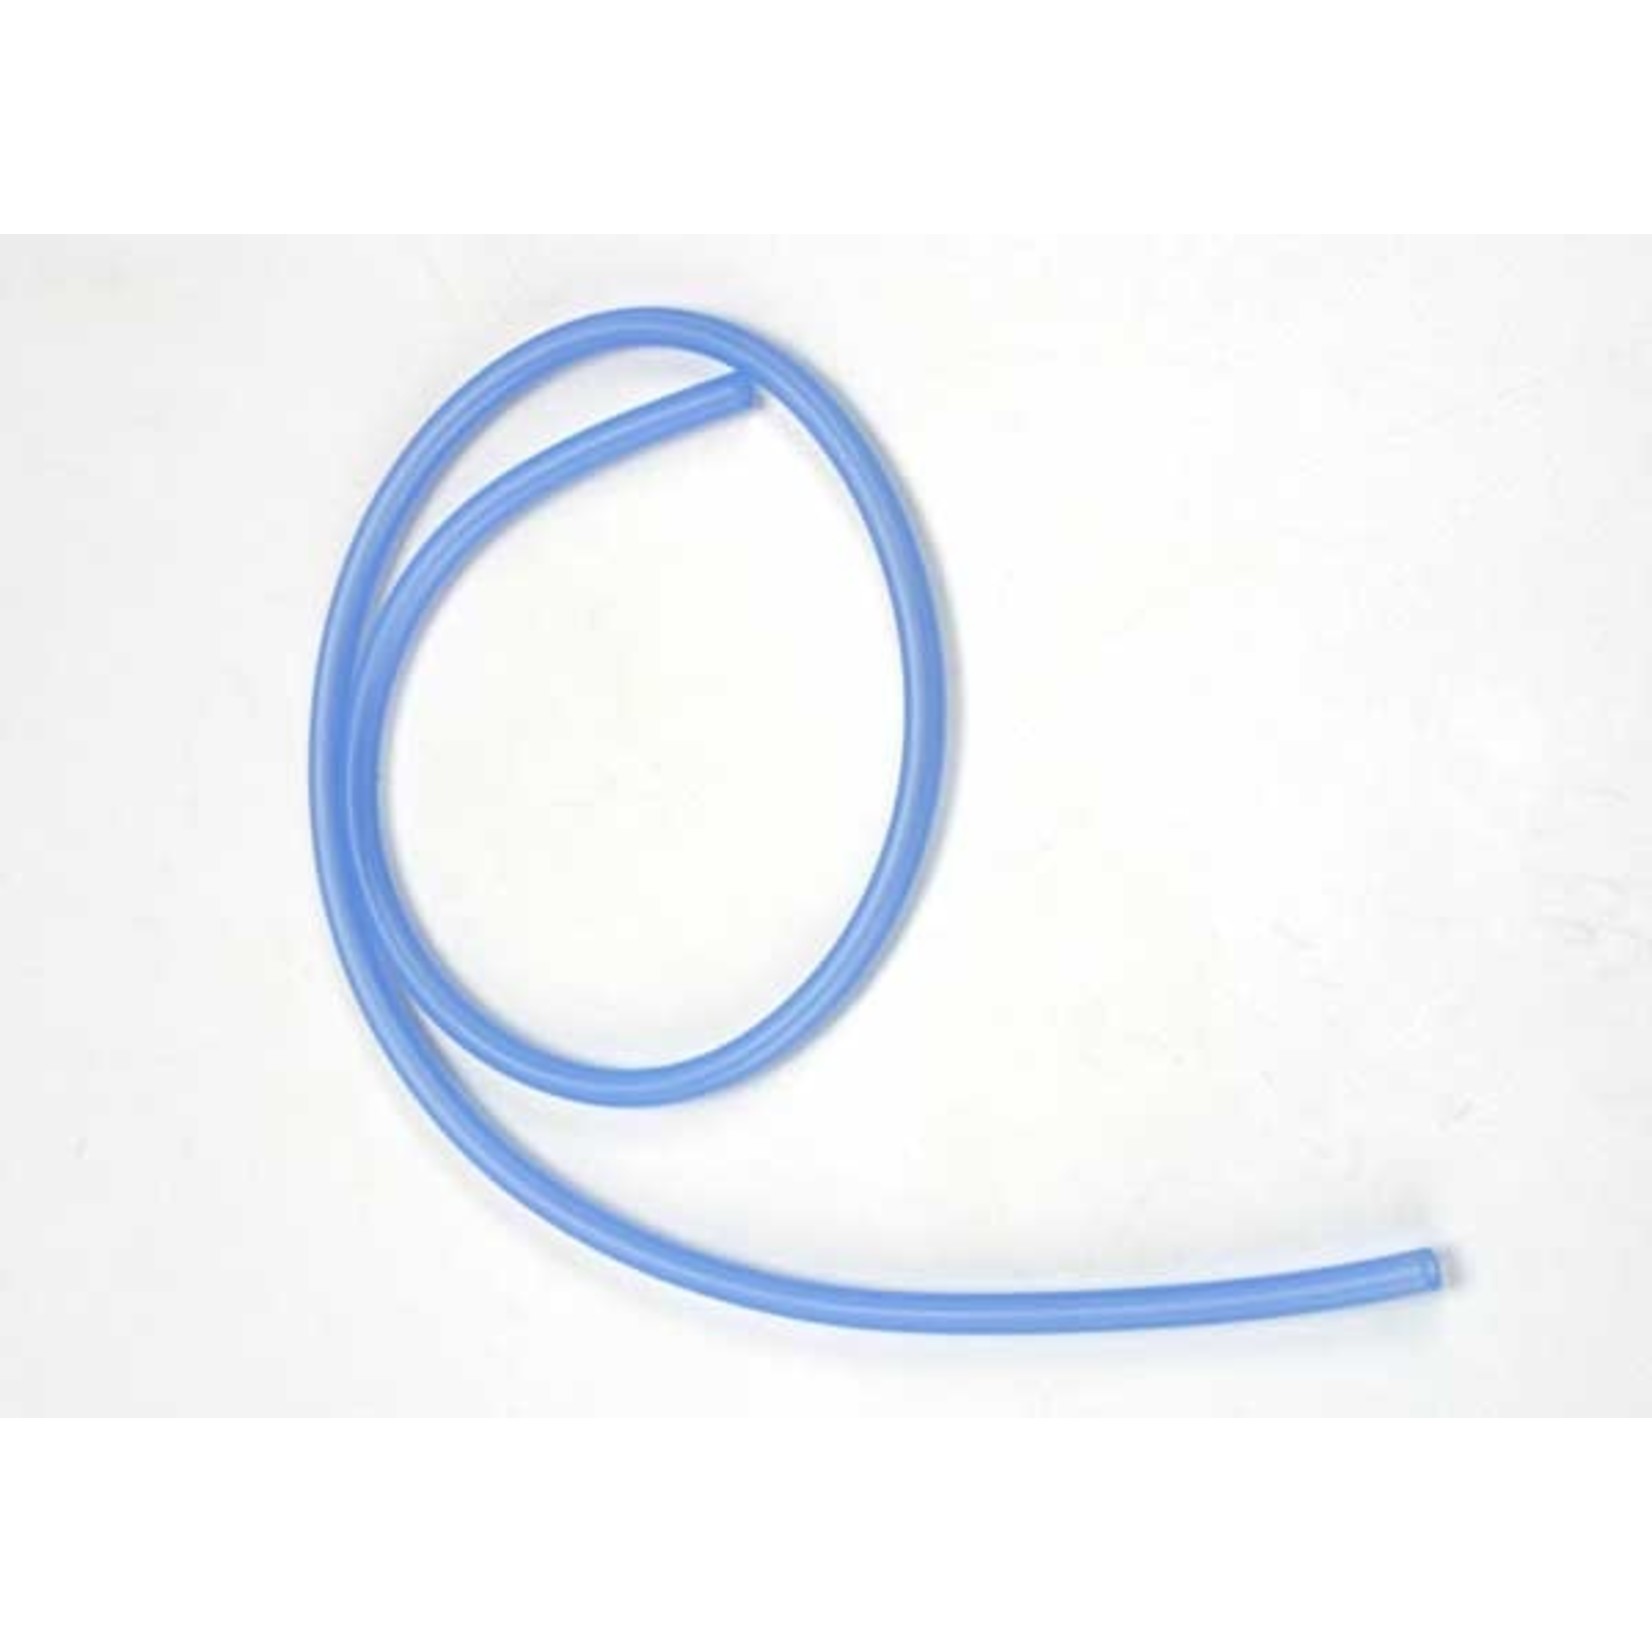 Traxxas 3147X - Fuel line (610mm or 2ft)